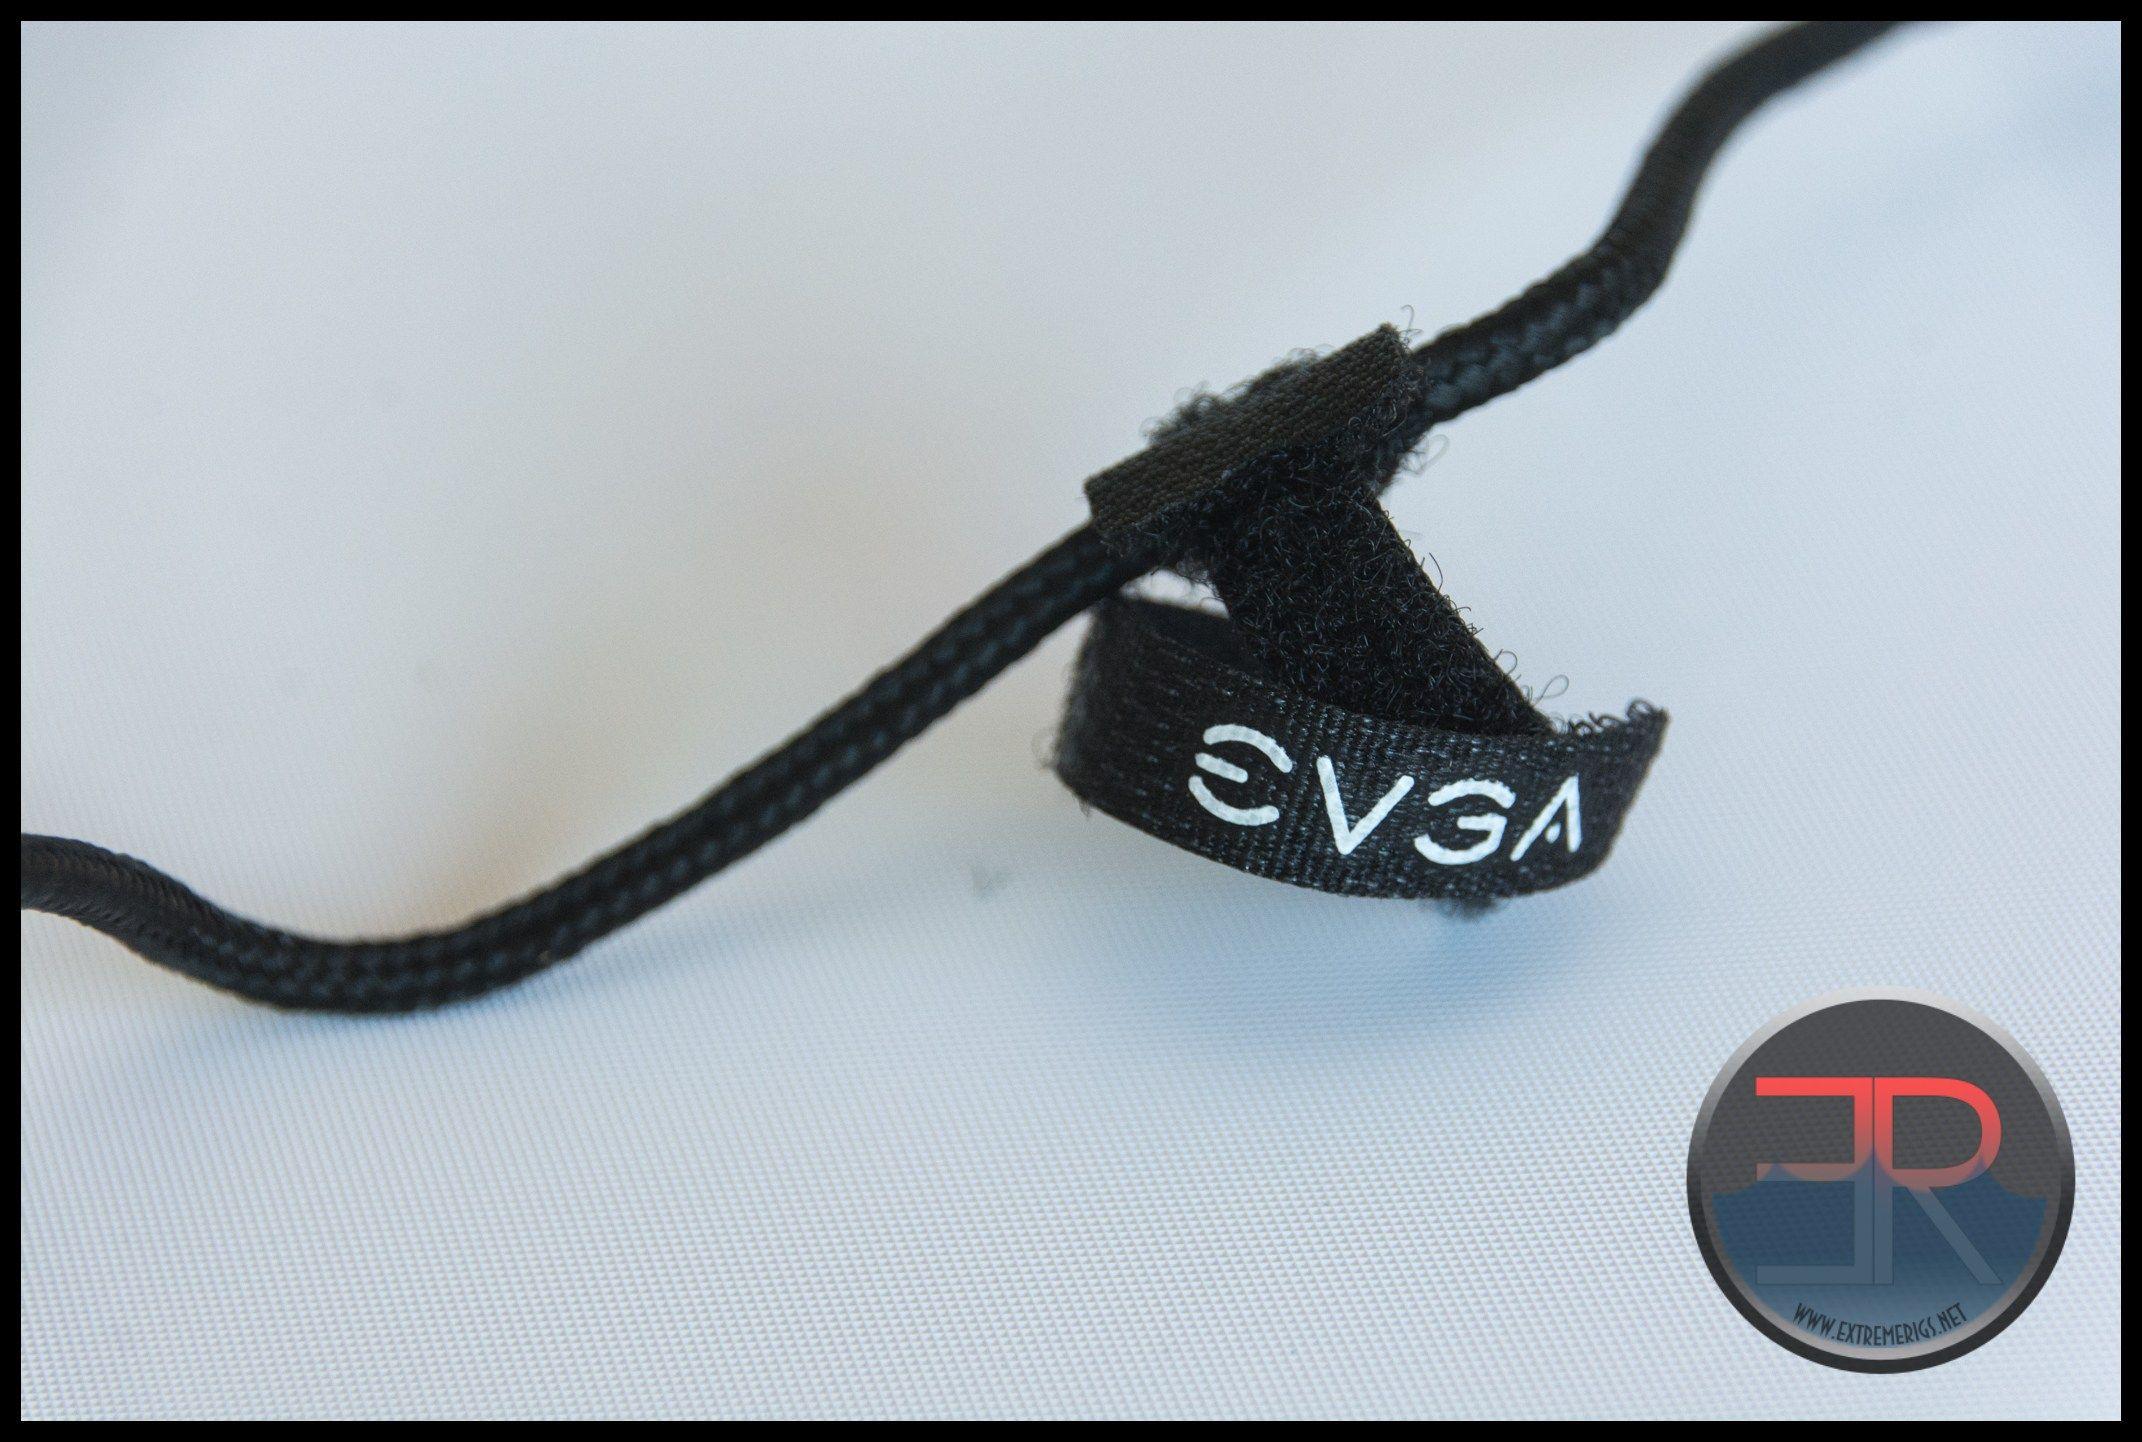 Torq Sniping Logo - EVGA Torq X10 Mouse Review - ExtremeRigs.net